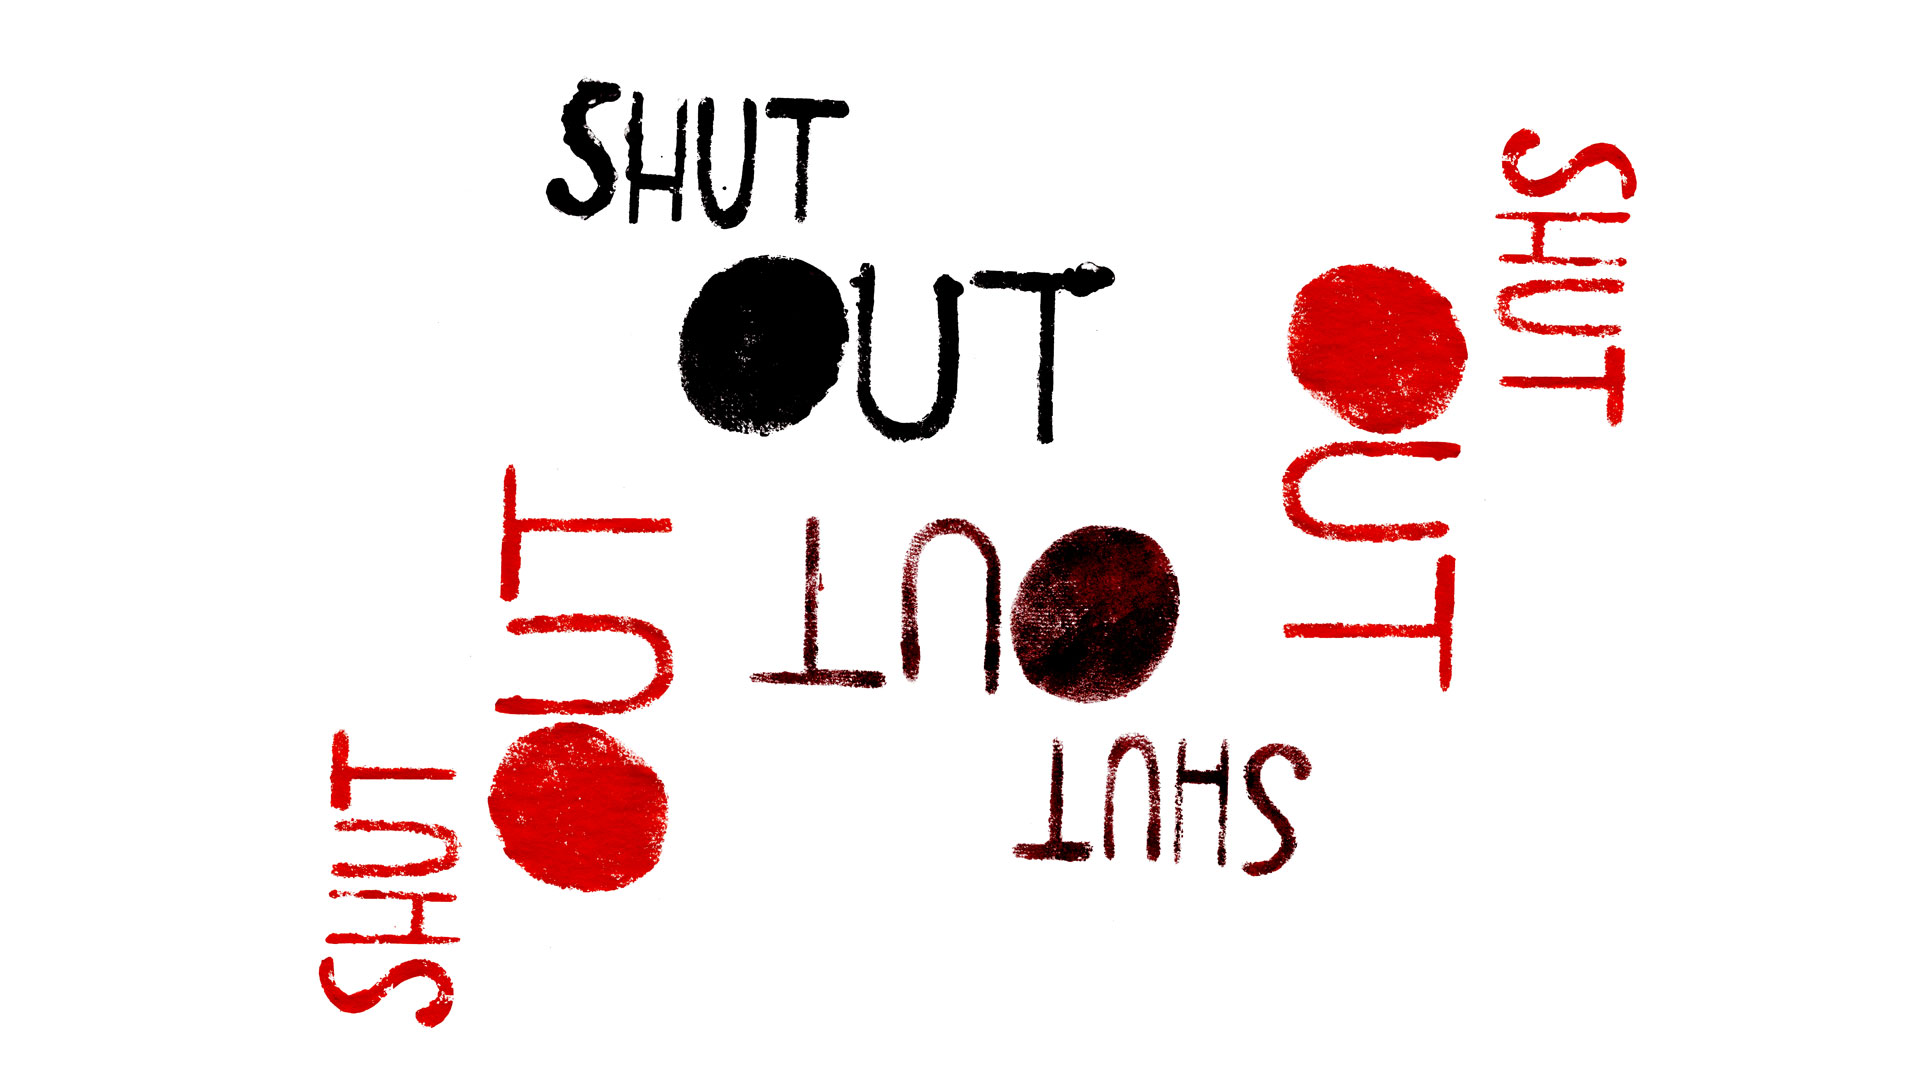 This print features the phrase 'shut out' written in uppercase hand-lettering, repeated four times across the piece. The lettering has a textured appearance due to the use of a stencil and acrylic paint applied with a sponge. The words are displayed in black, red, and brown against a white background.